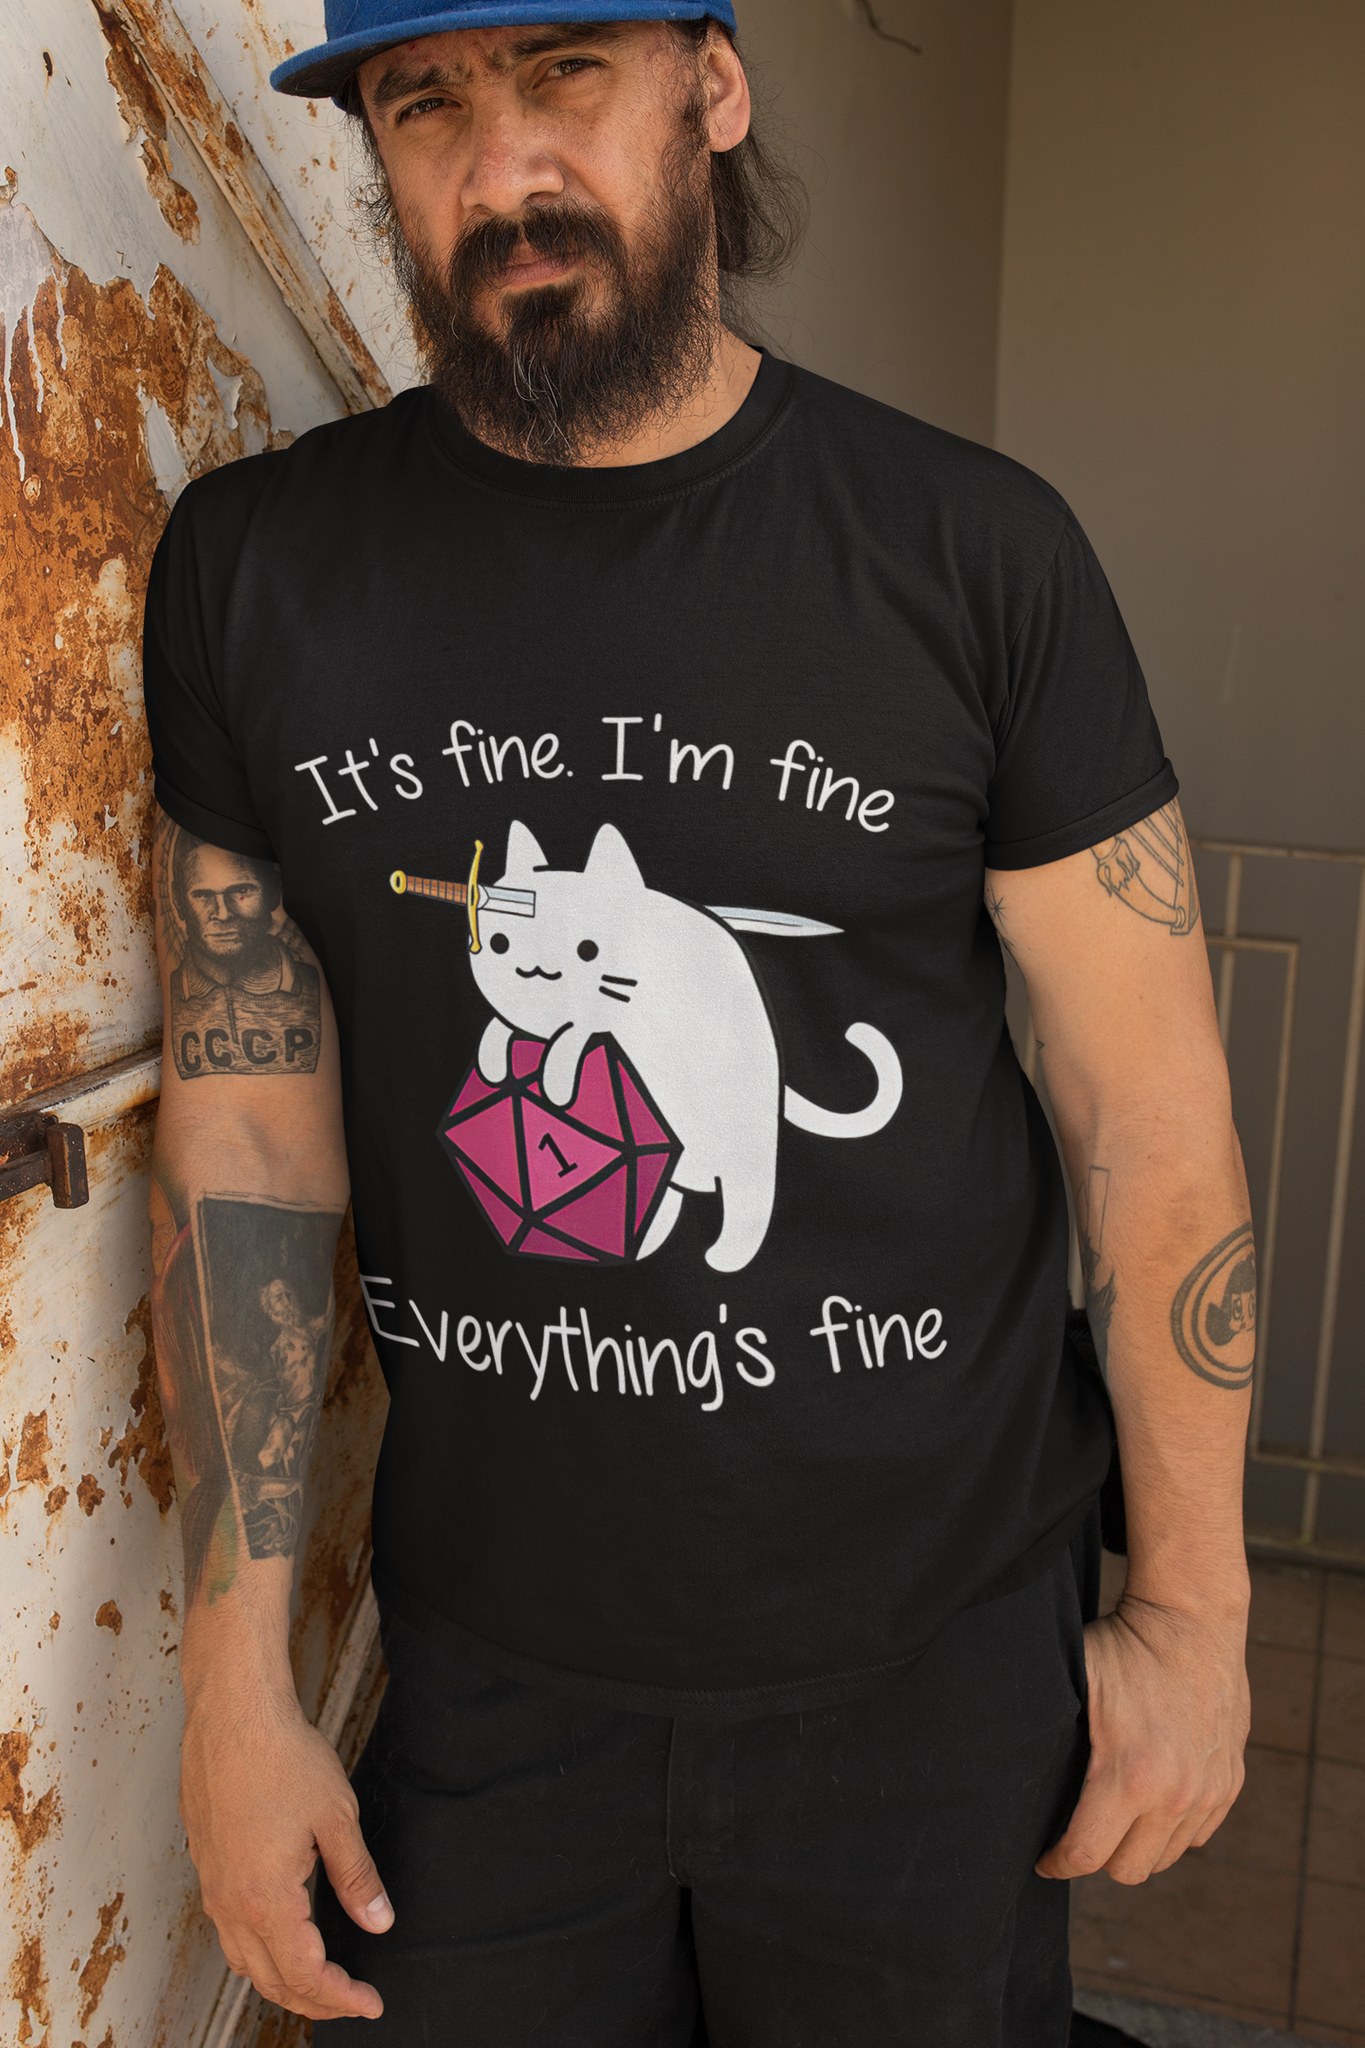 Dungeon And Dragon T Shirt, RPG Dice Games Tshirt, DND Cat Its Fine Im Fine Everythings Fine T Shirt